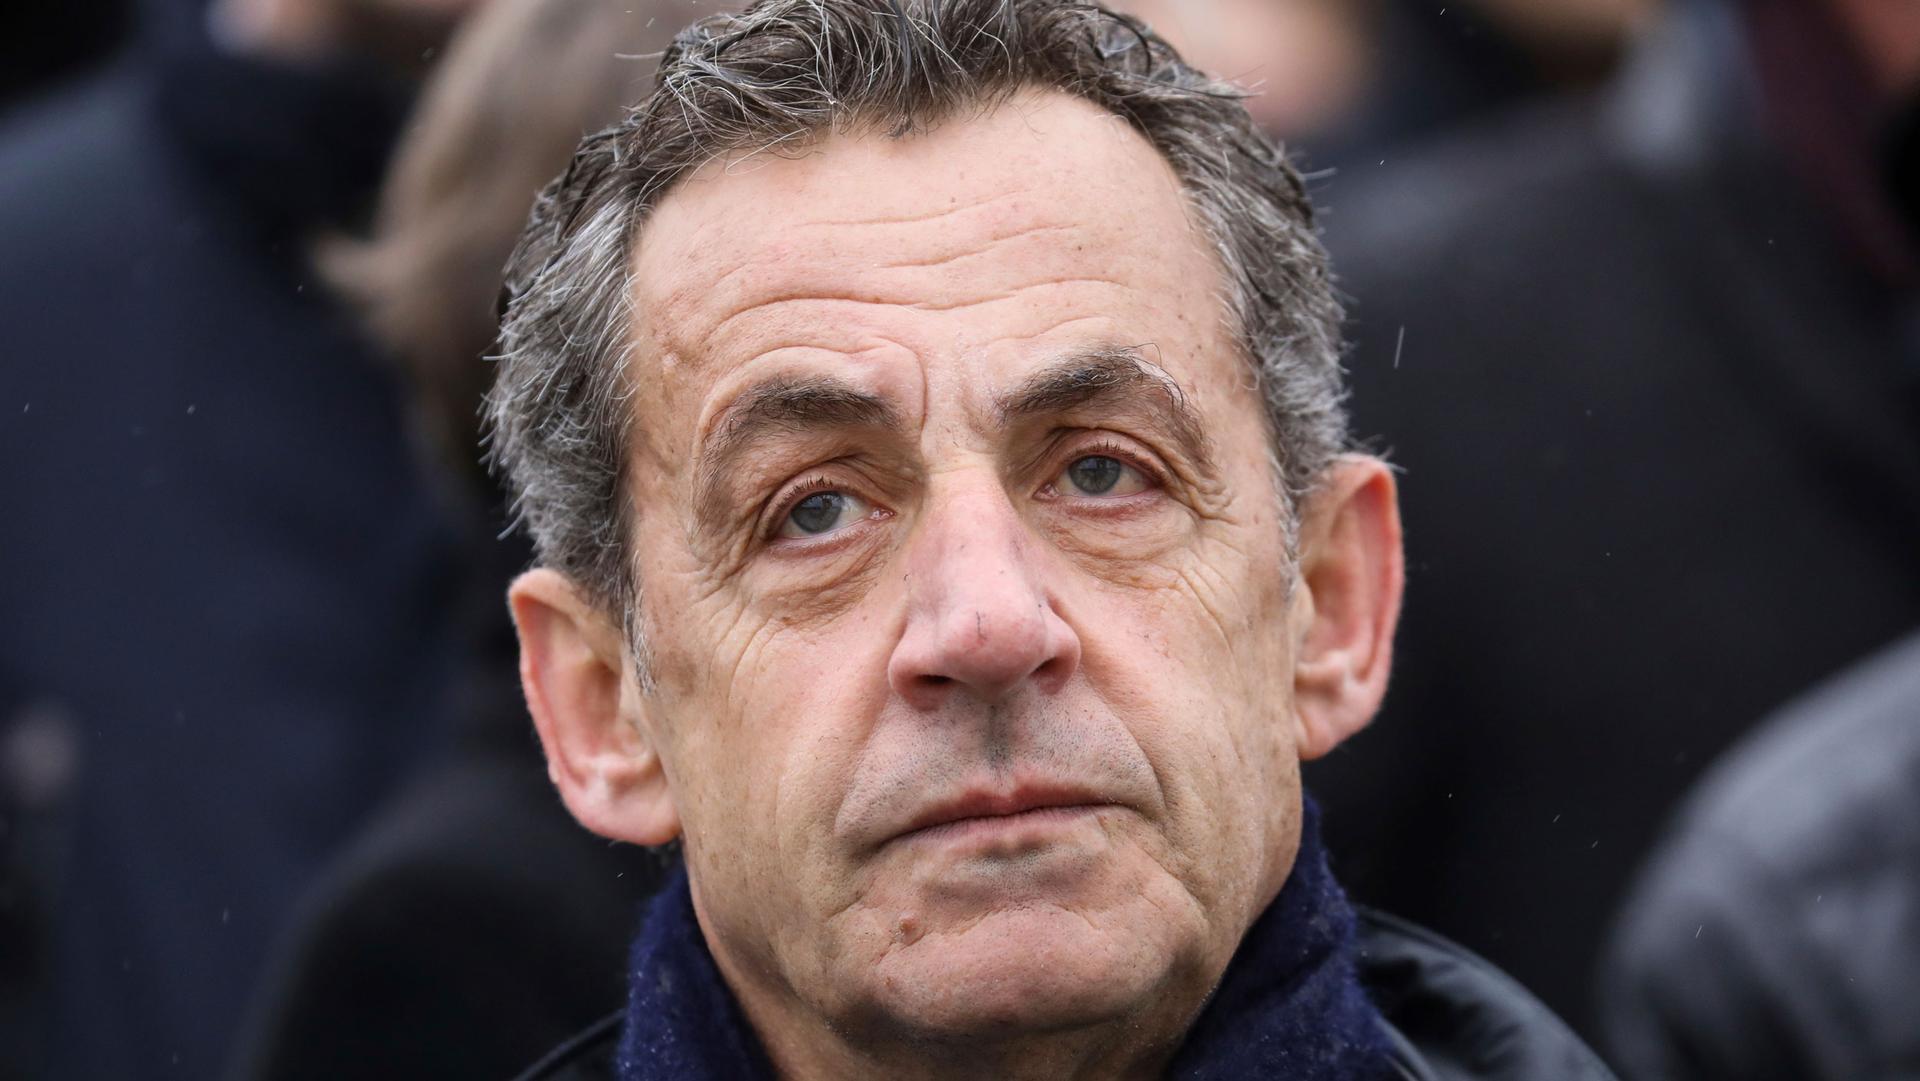 A close up photograph of French former president Nicolas Sarkozy who is wearing a scarf.